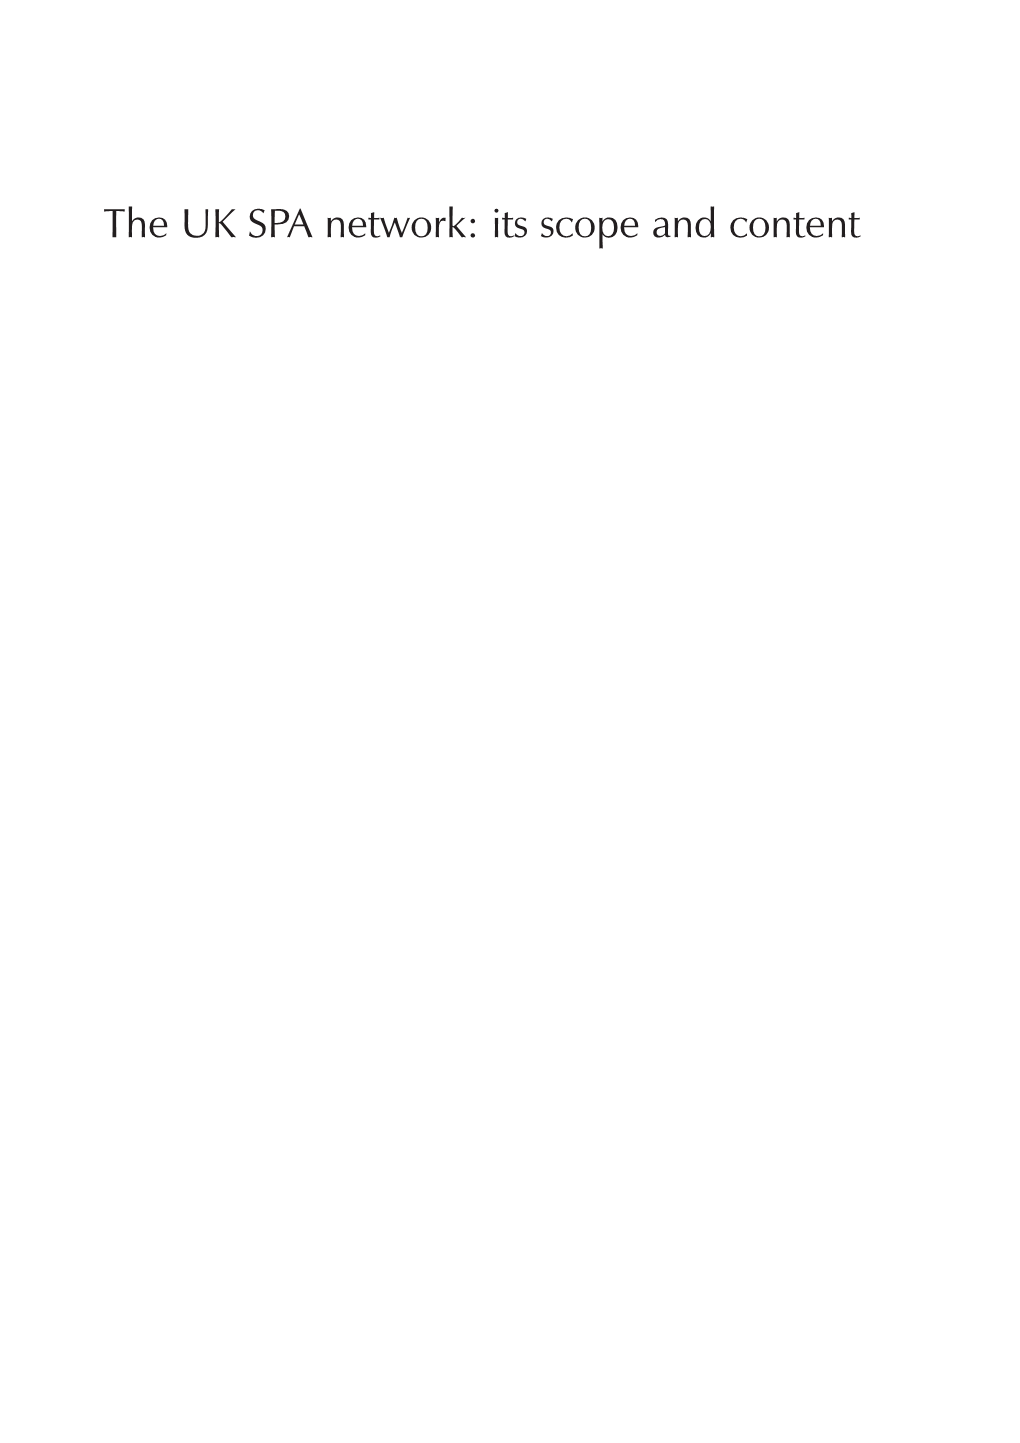 The UK SPA Network: Its Scope and Content